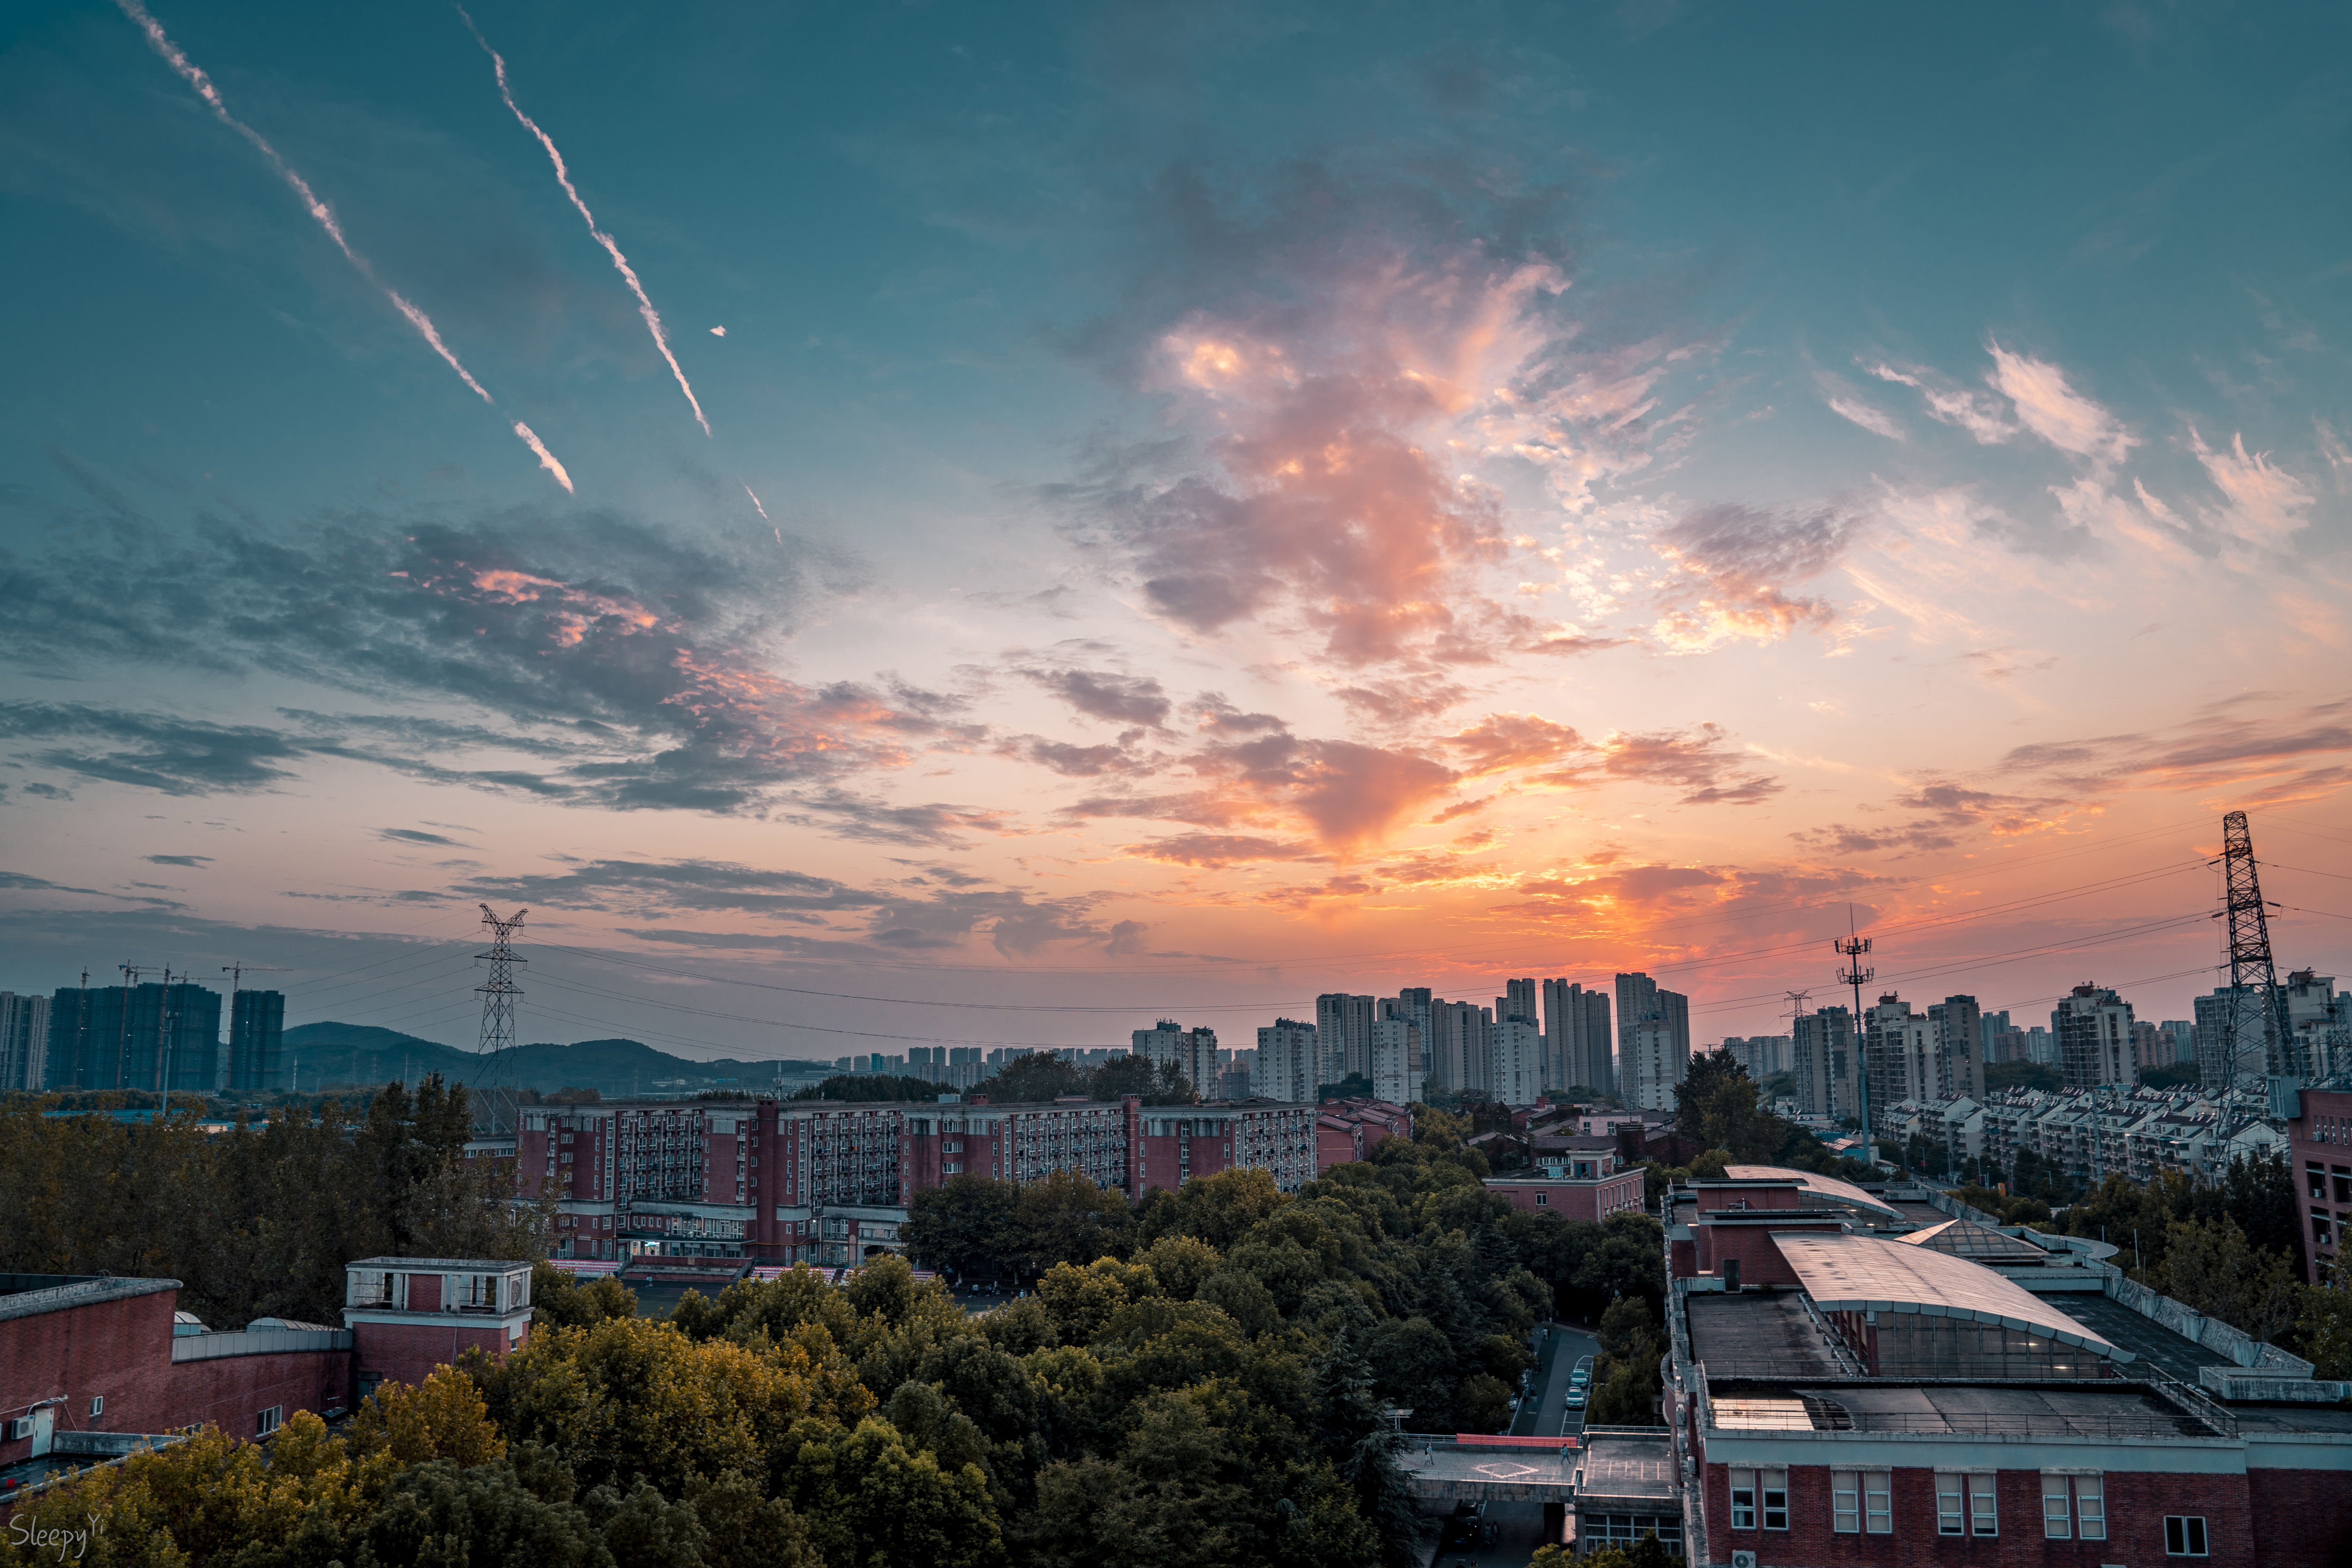 General 6000x4000 Nanjing city sunset China Asia dusk clouds building photography dawn hills